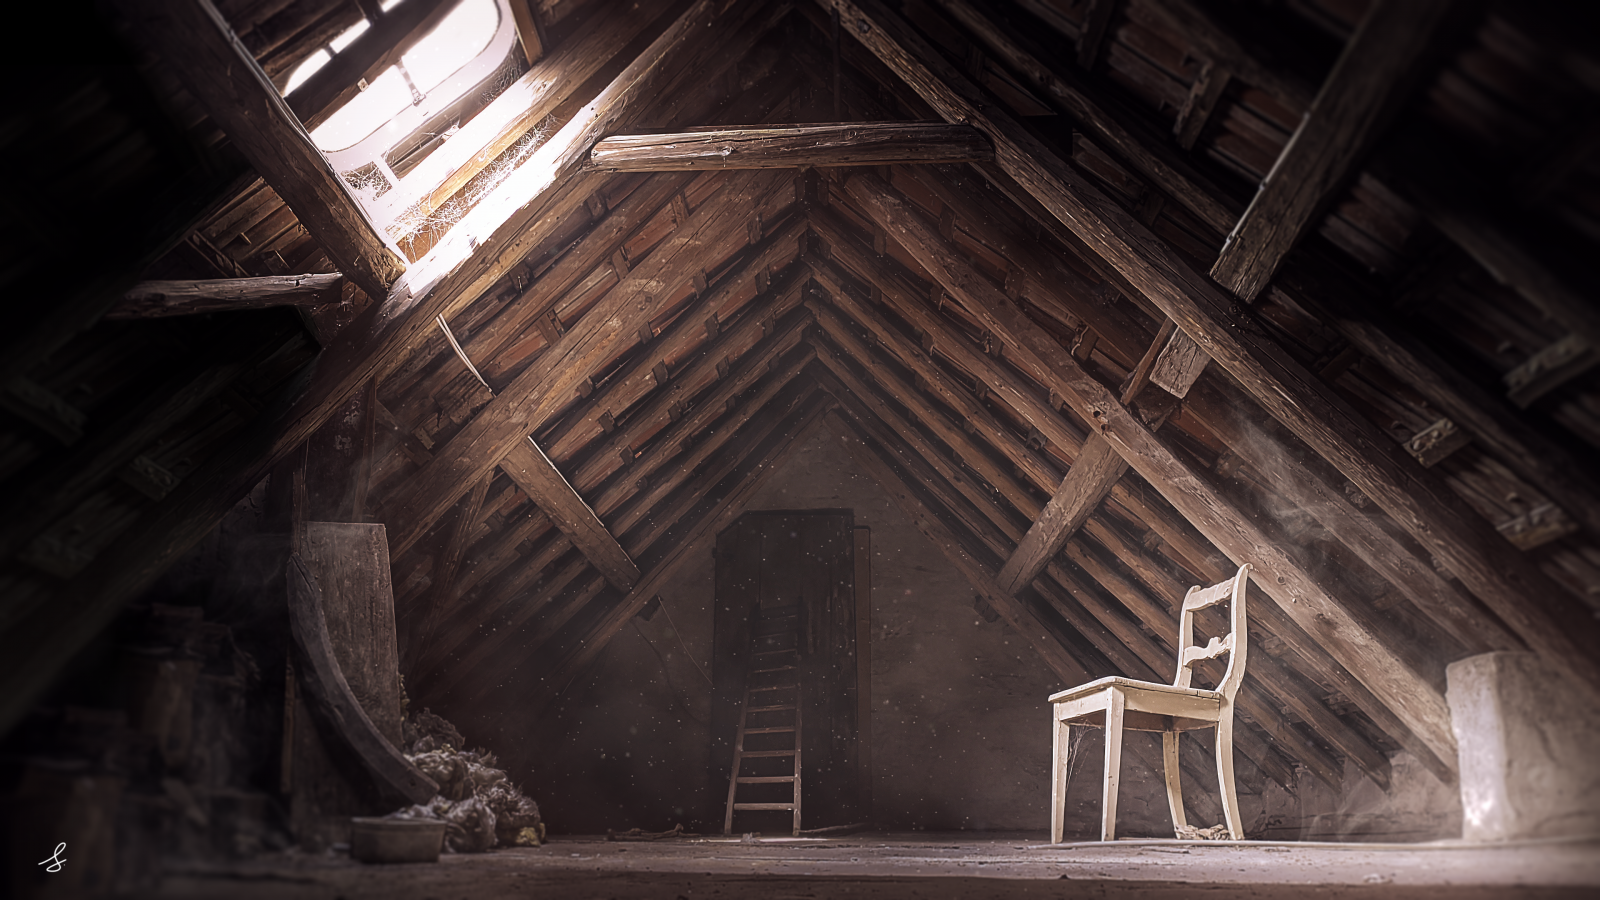 Wallpaper, emotion, ancient, photography, attics, horror, desolation, isolation, dust, vintage, wood house, old building, Photohop, light effects, grunge, decay, hope, sun rays 3840x2160